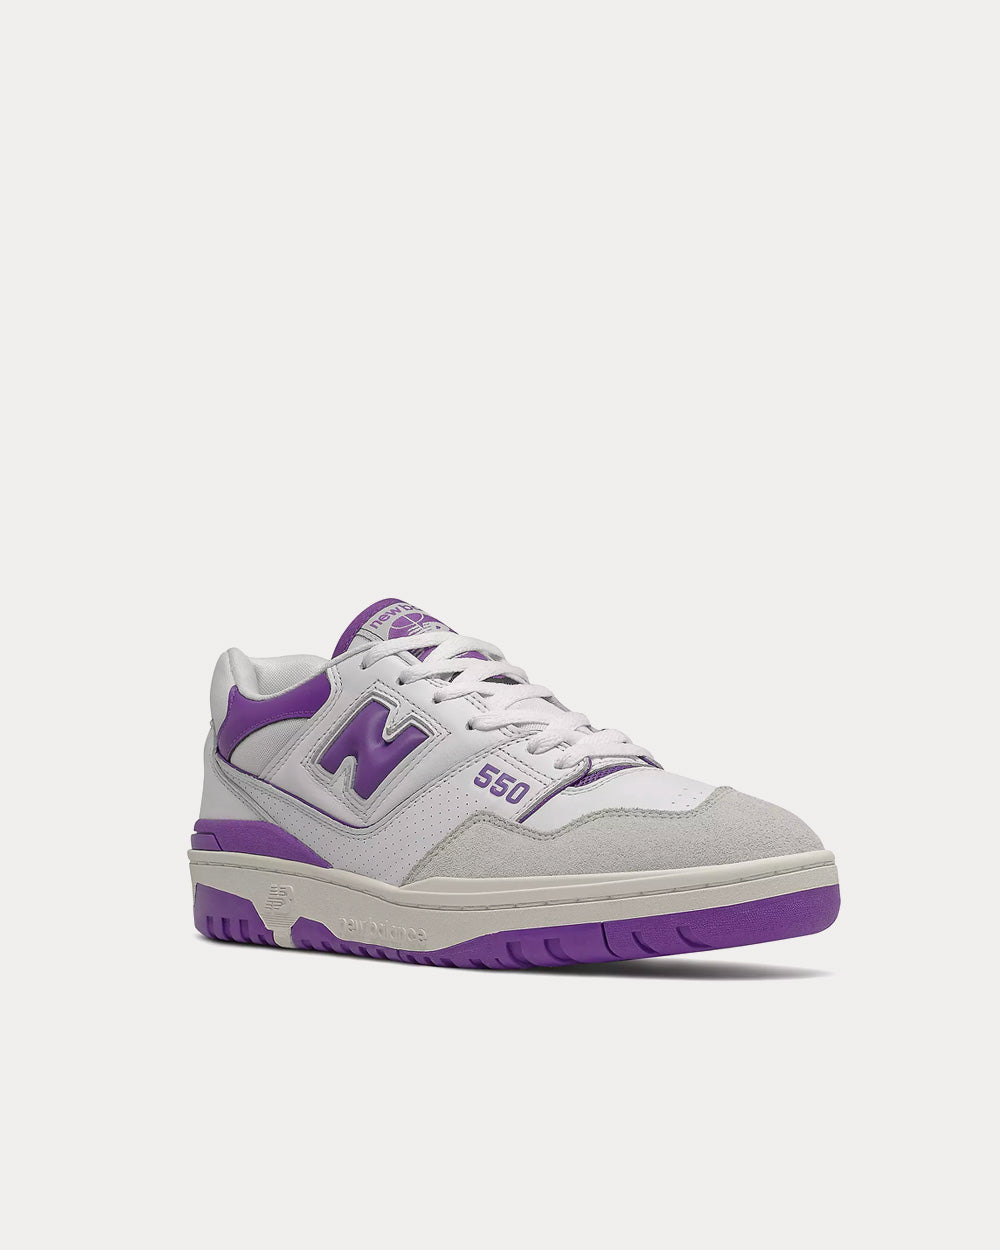 New Balance - 550 White with Prism Purple Low Top Sneakers